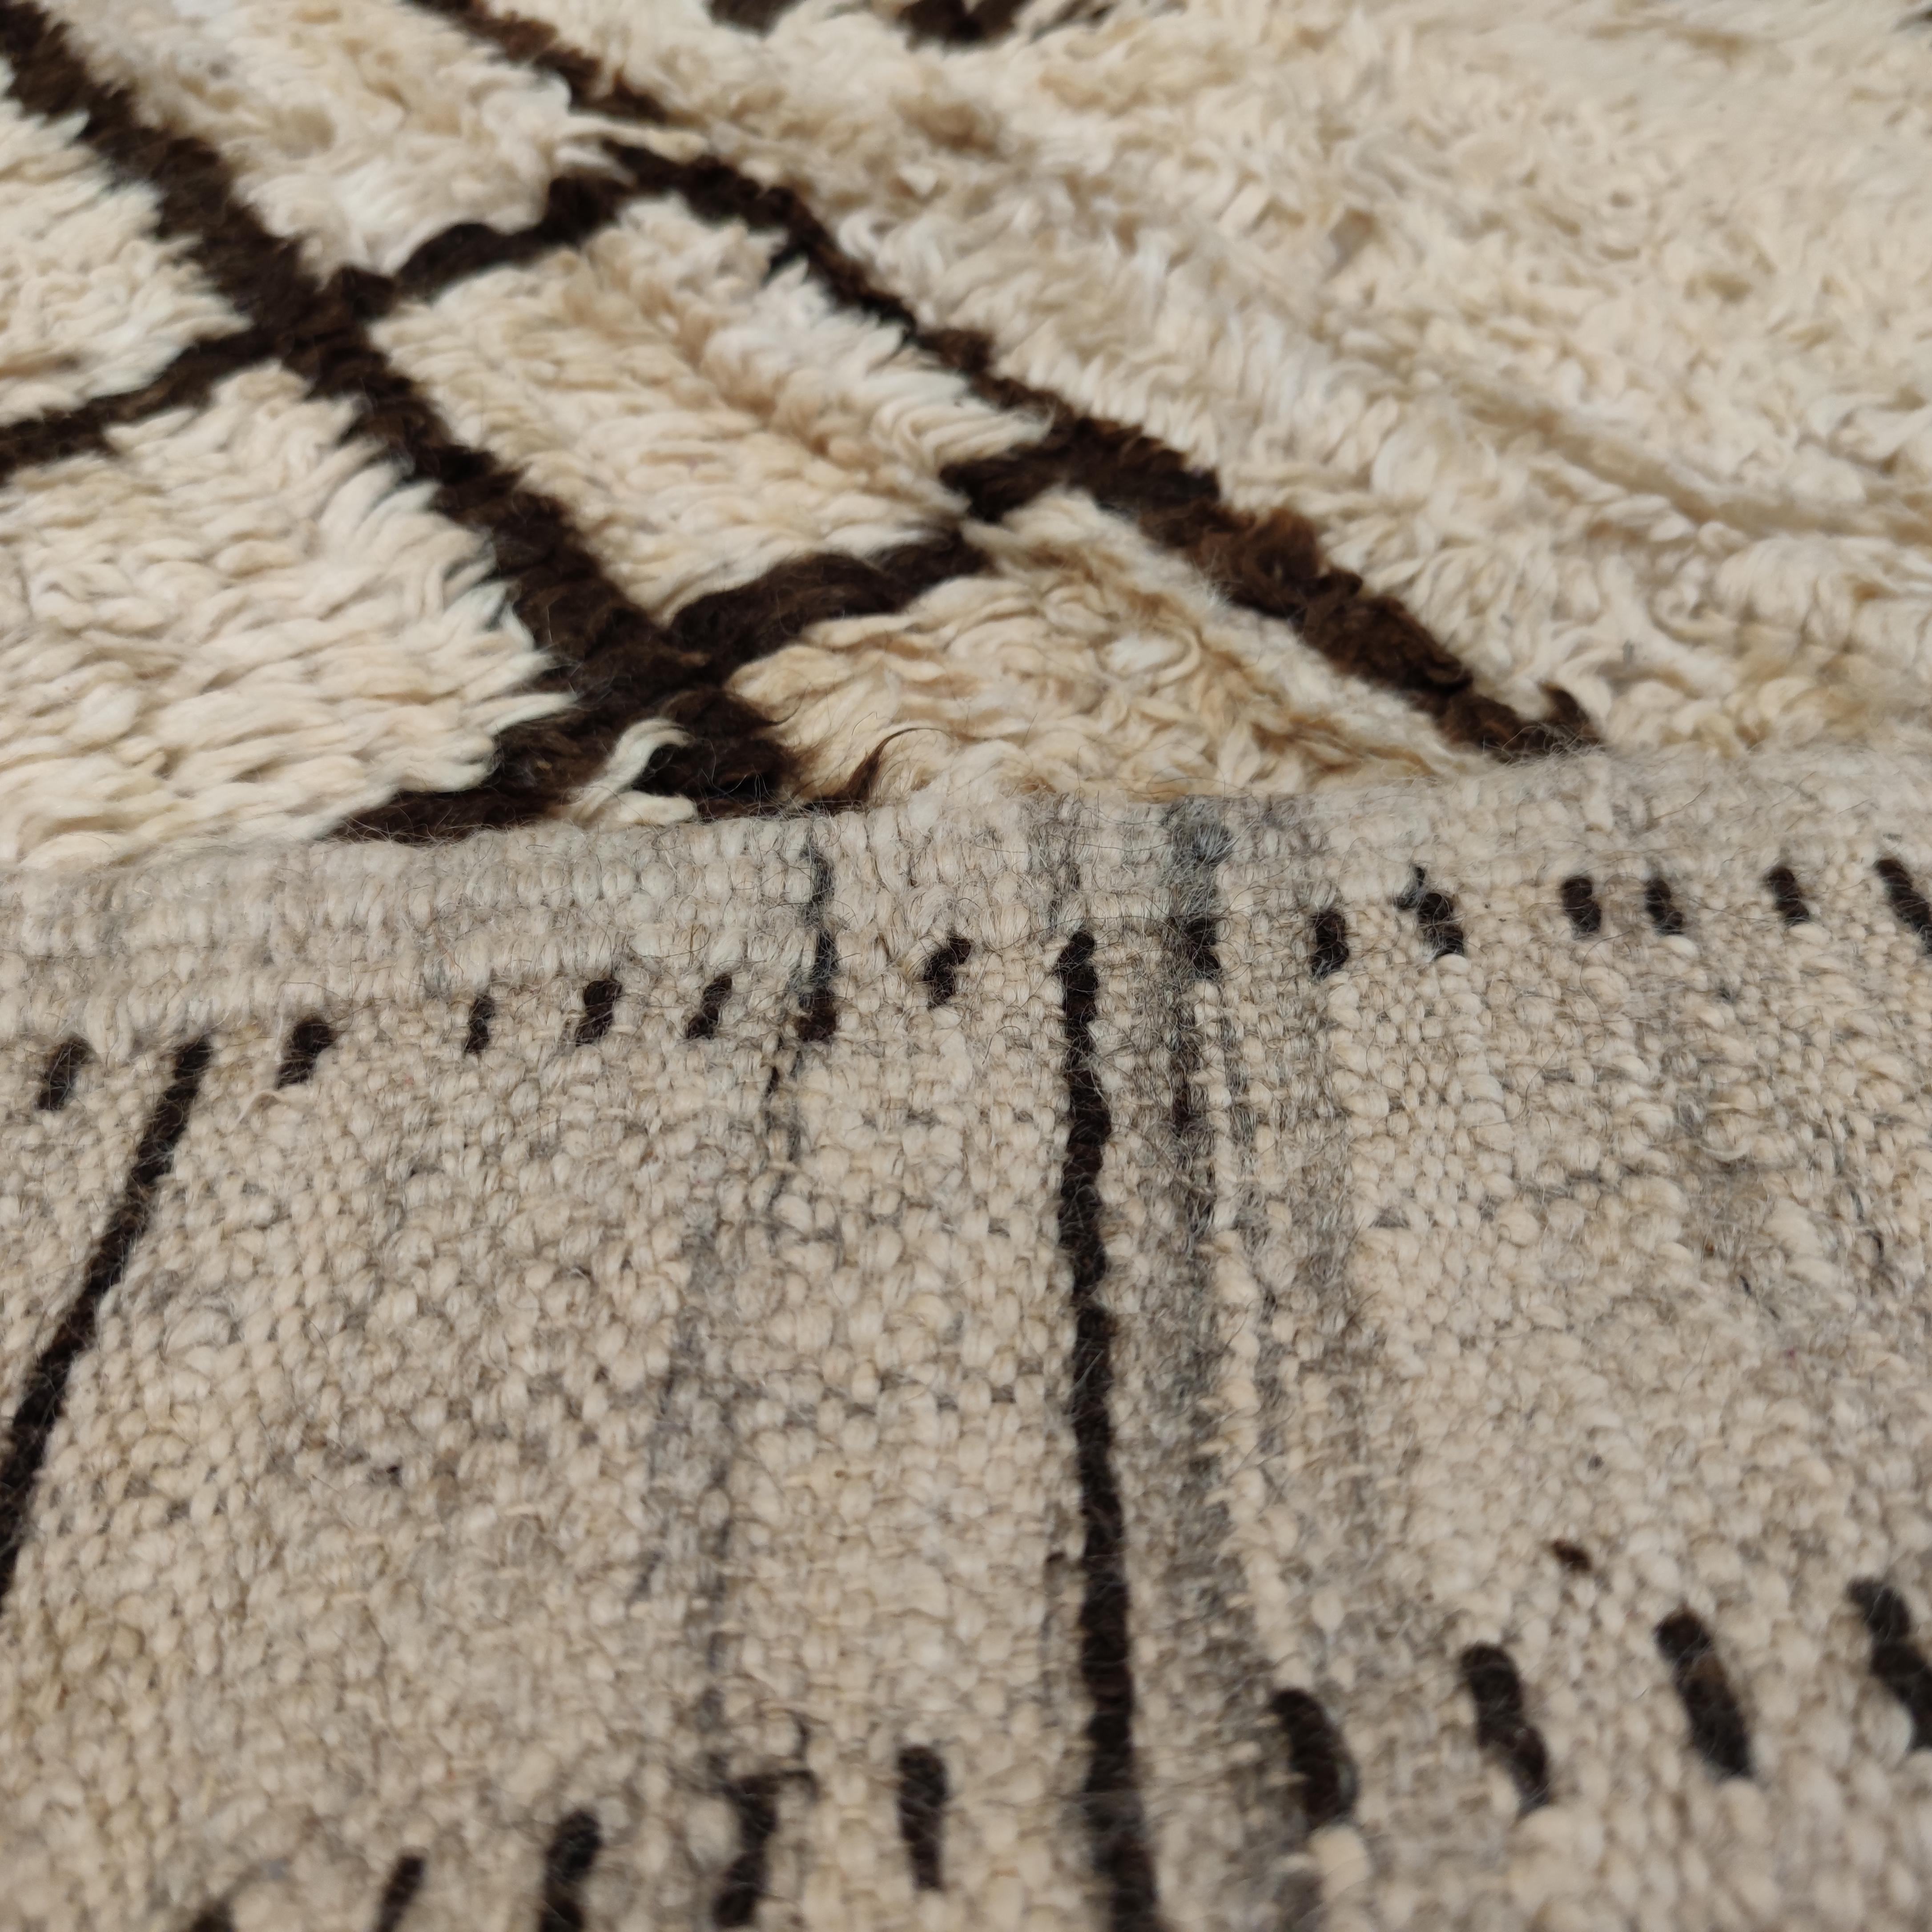 The rugs from the Azilal region, located in the Moroccan central High Atlas, have been a relatively recent discovery. Distinguished by abstract, quasi-calligraphic patterns often on an ivory background, they differ from the white ground Middle Atlas